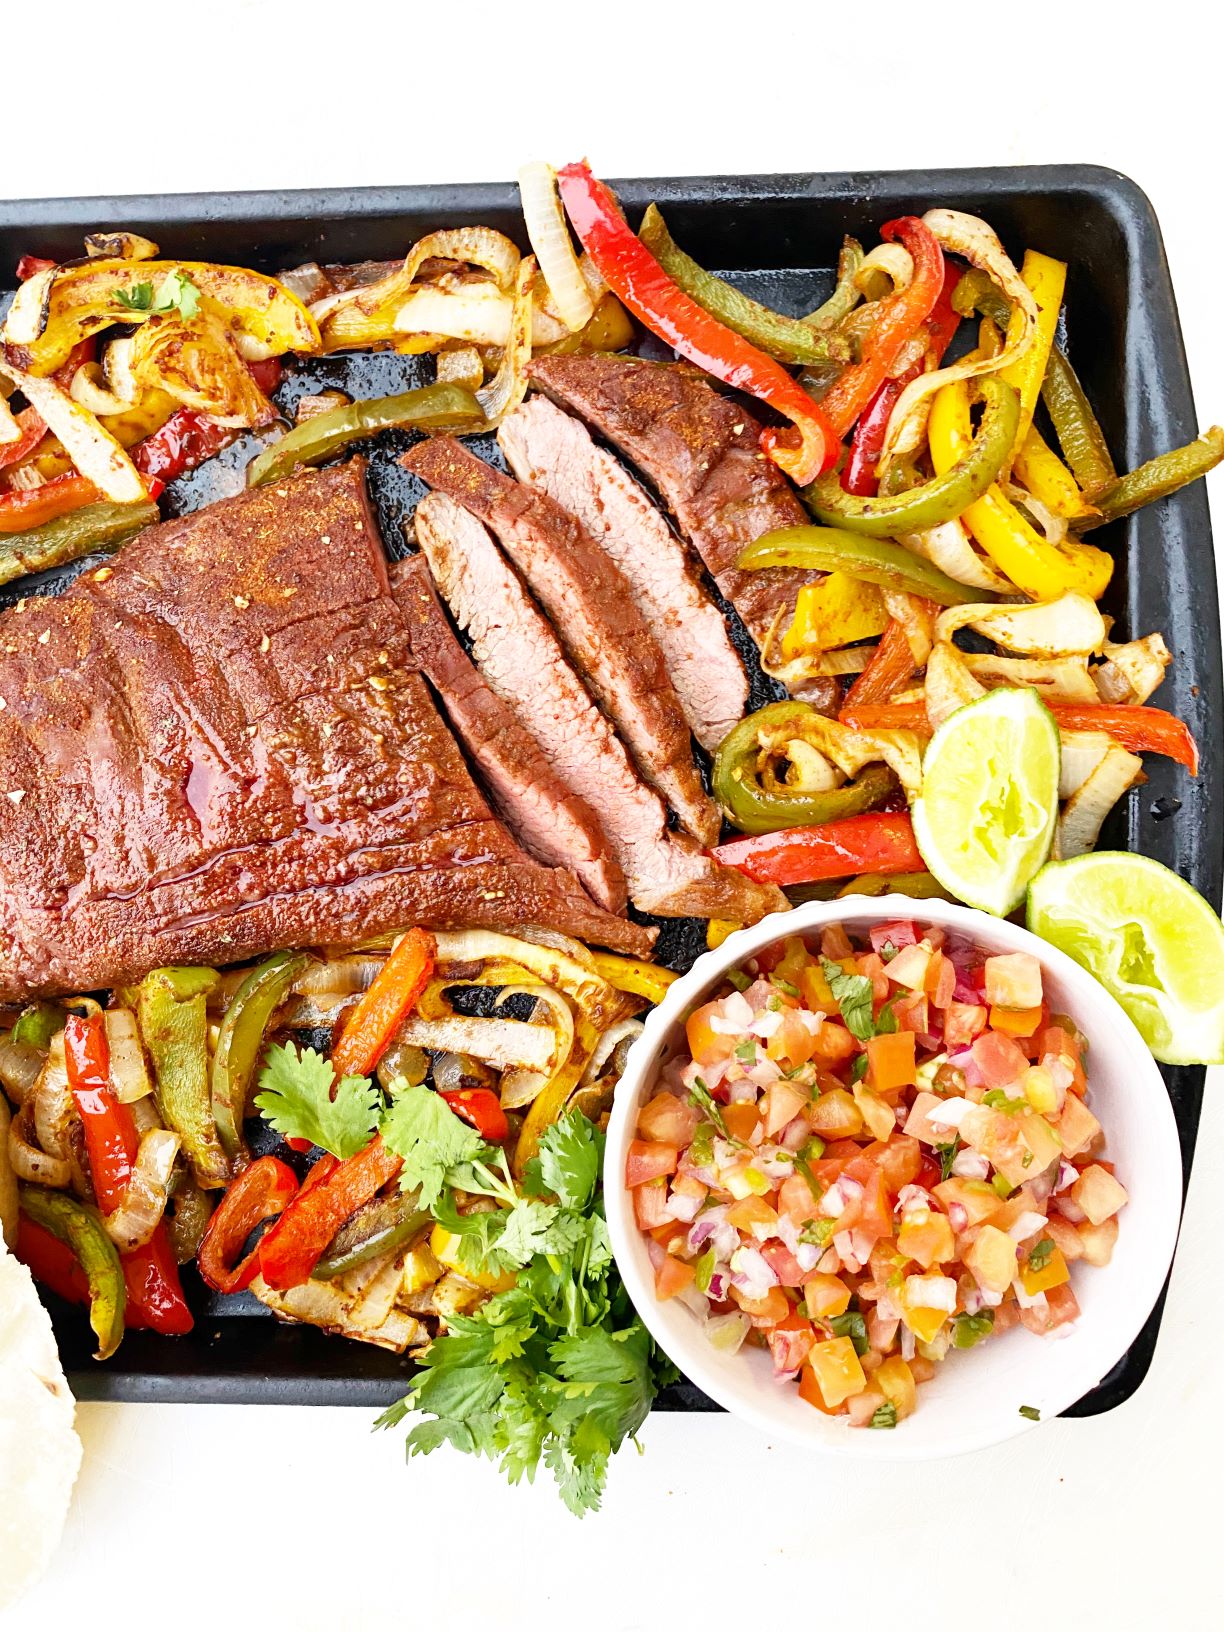 Healthy Steak Fajita Bowls with Creamy Chipotle Sauce – Eating at Altitude